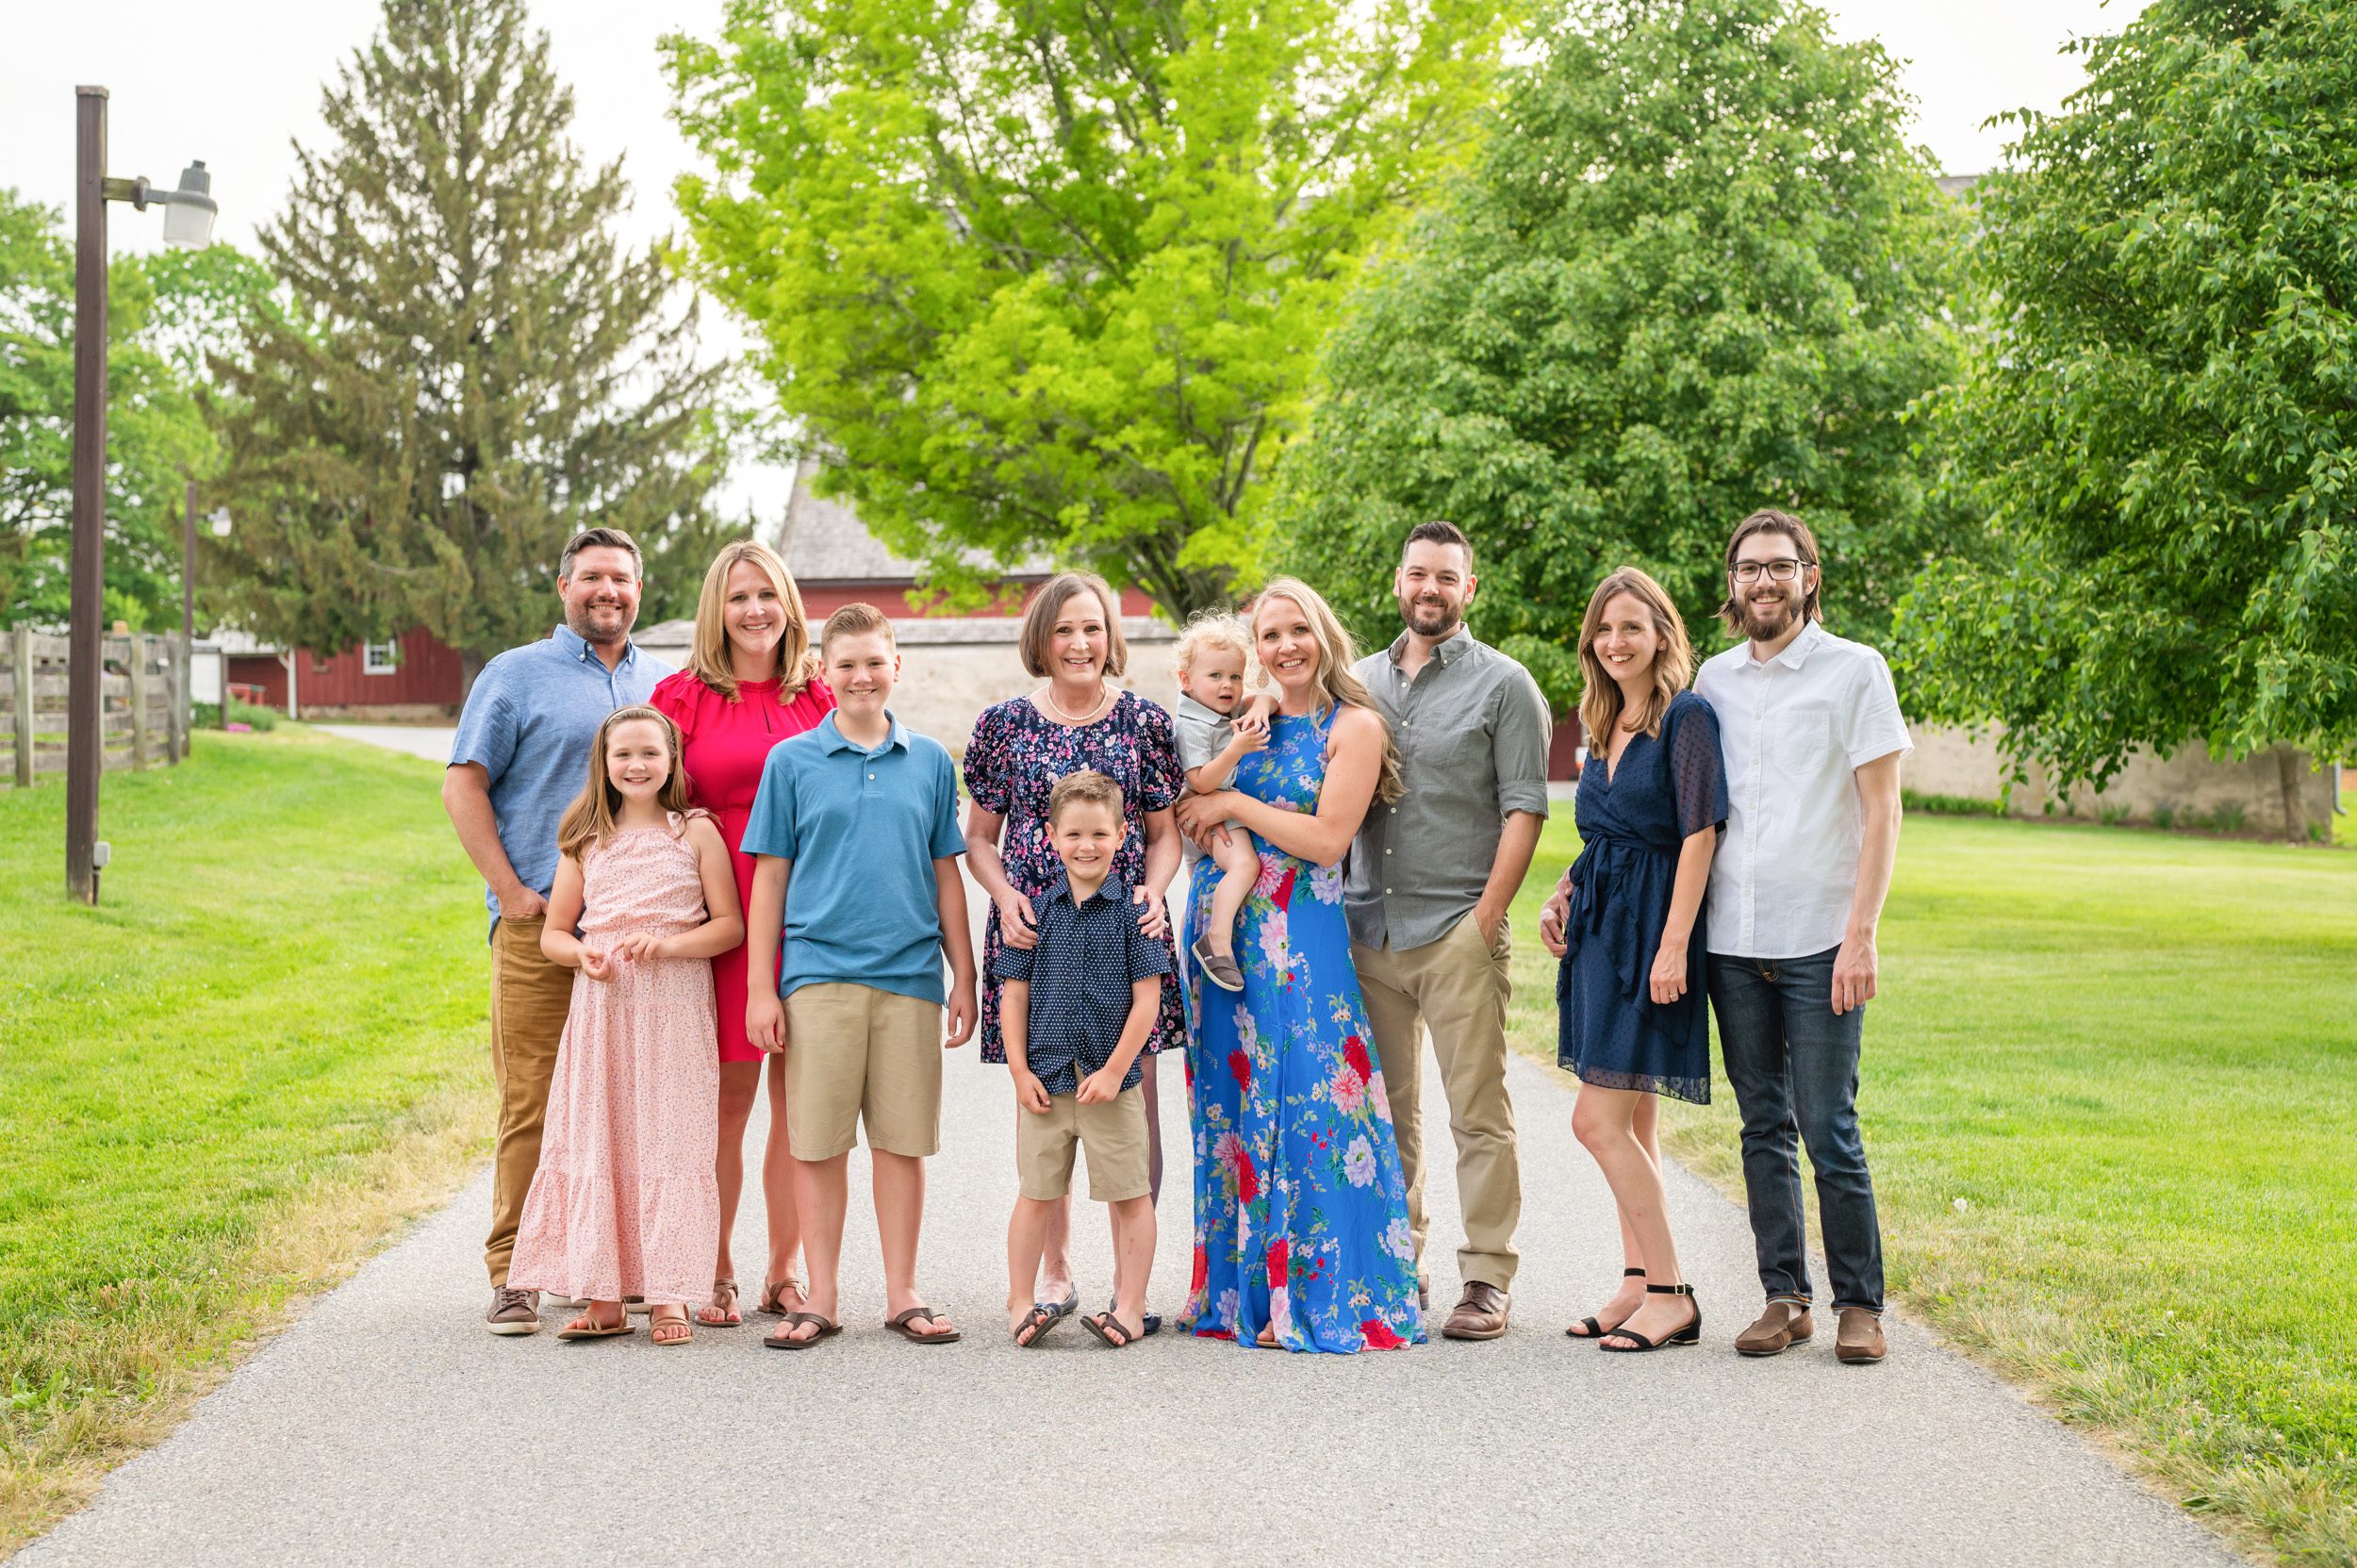 An extended family standing on a pathway with trees and red barns in the background during an extended family photo session